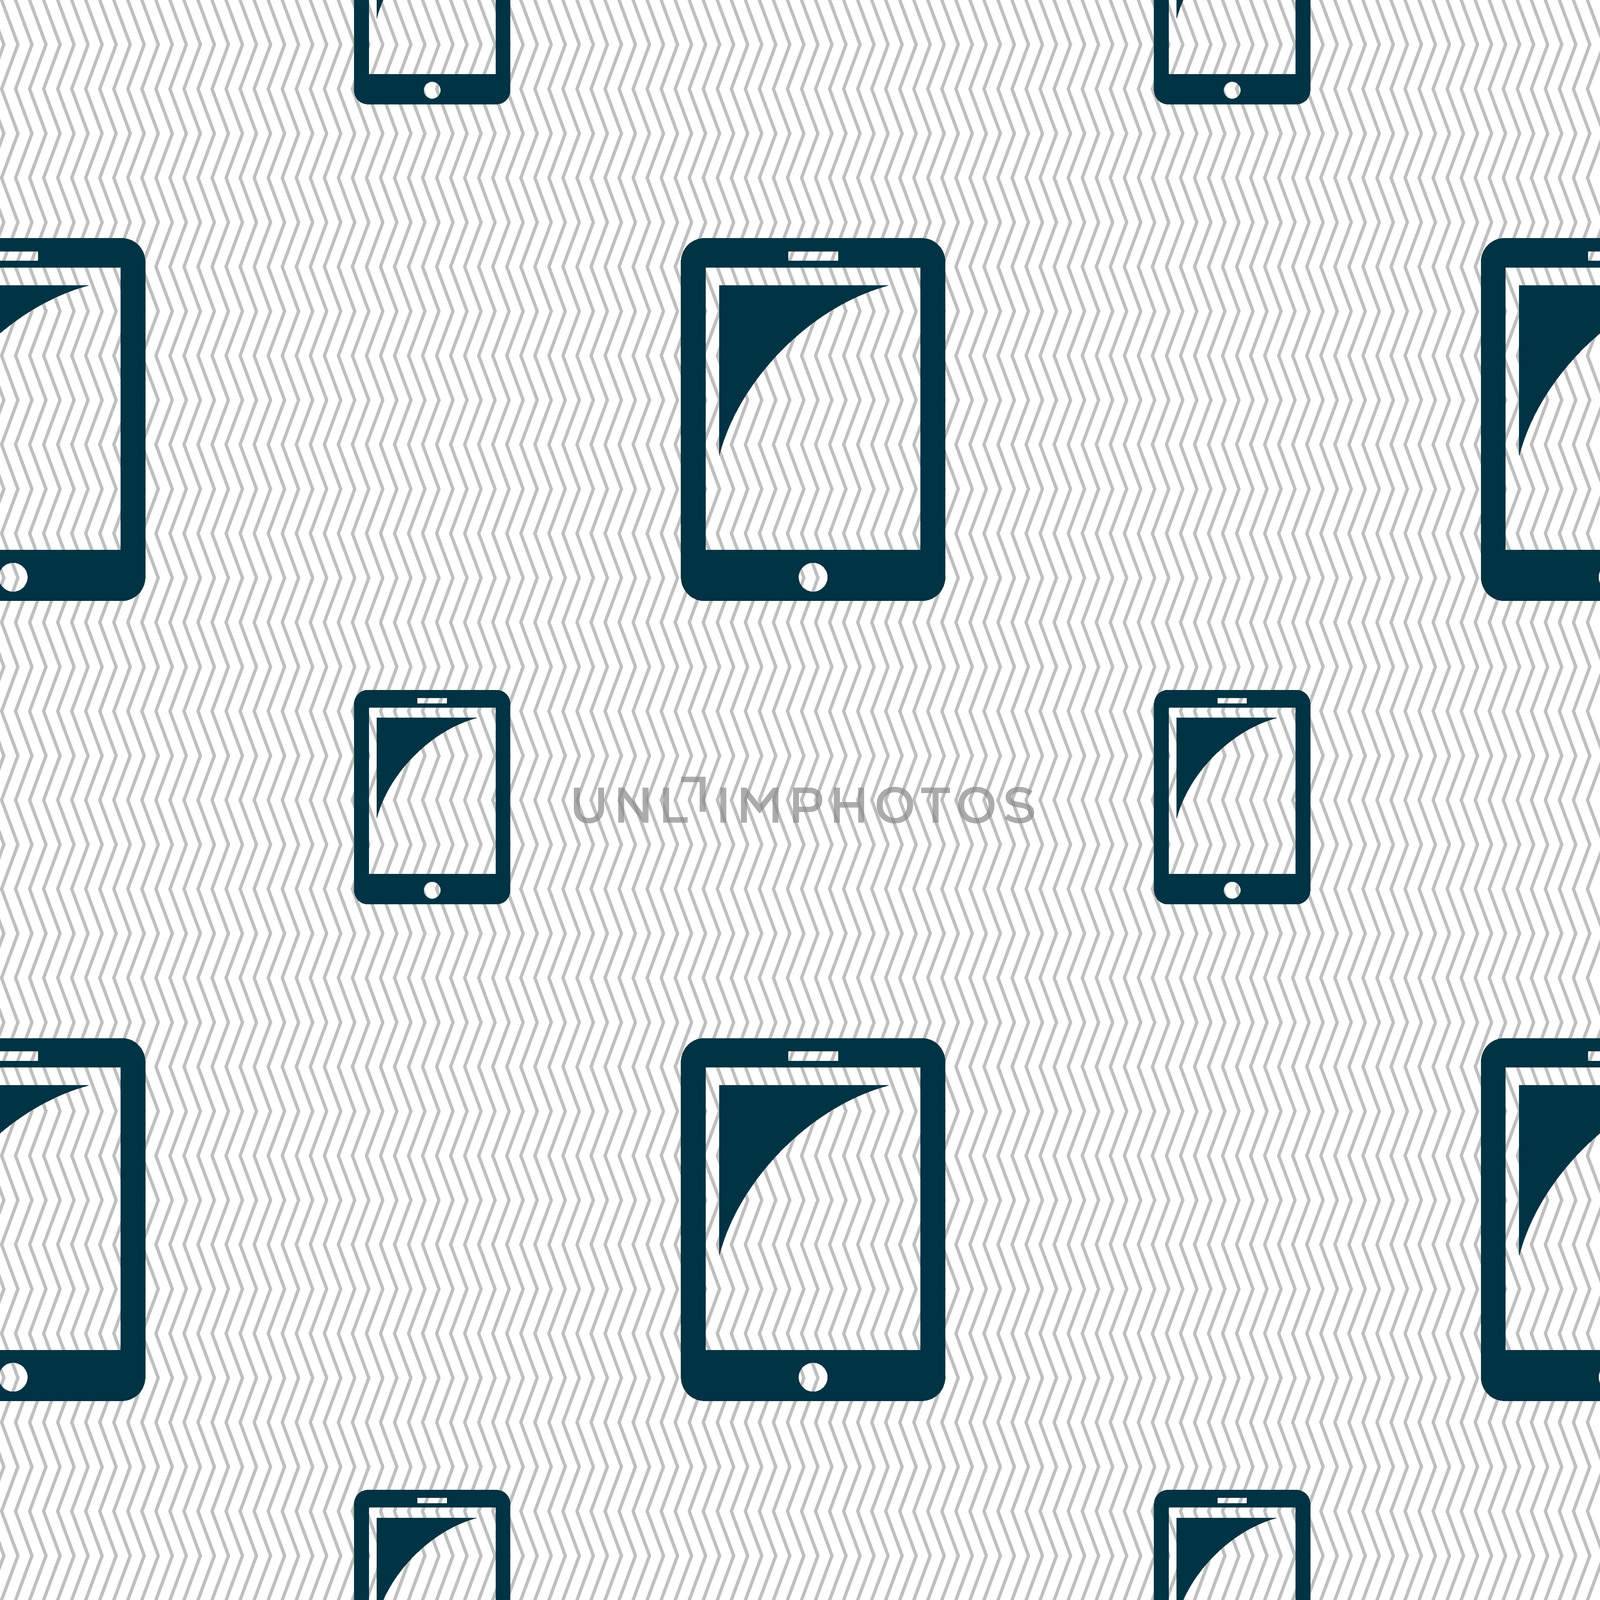 Tablet sign icon. smartphone button. Seamless pattern with geometric texture. illustration